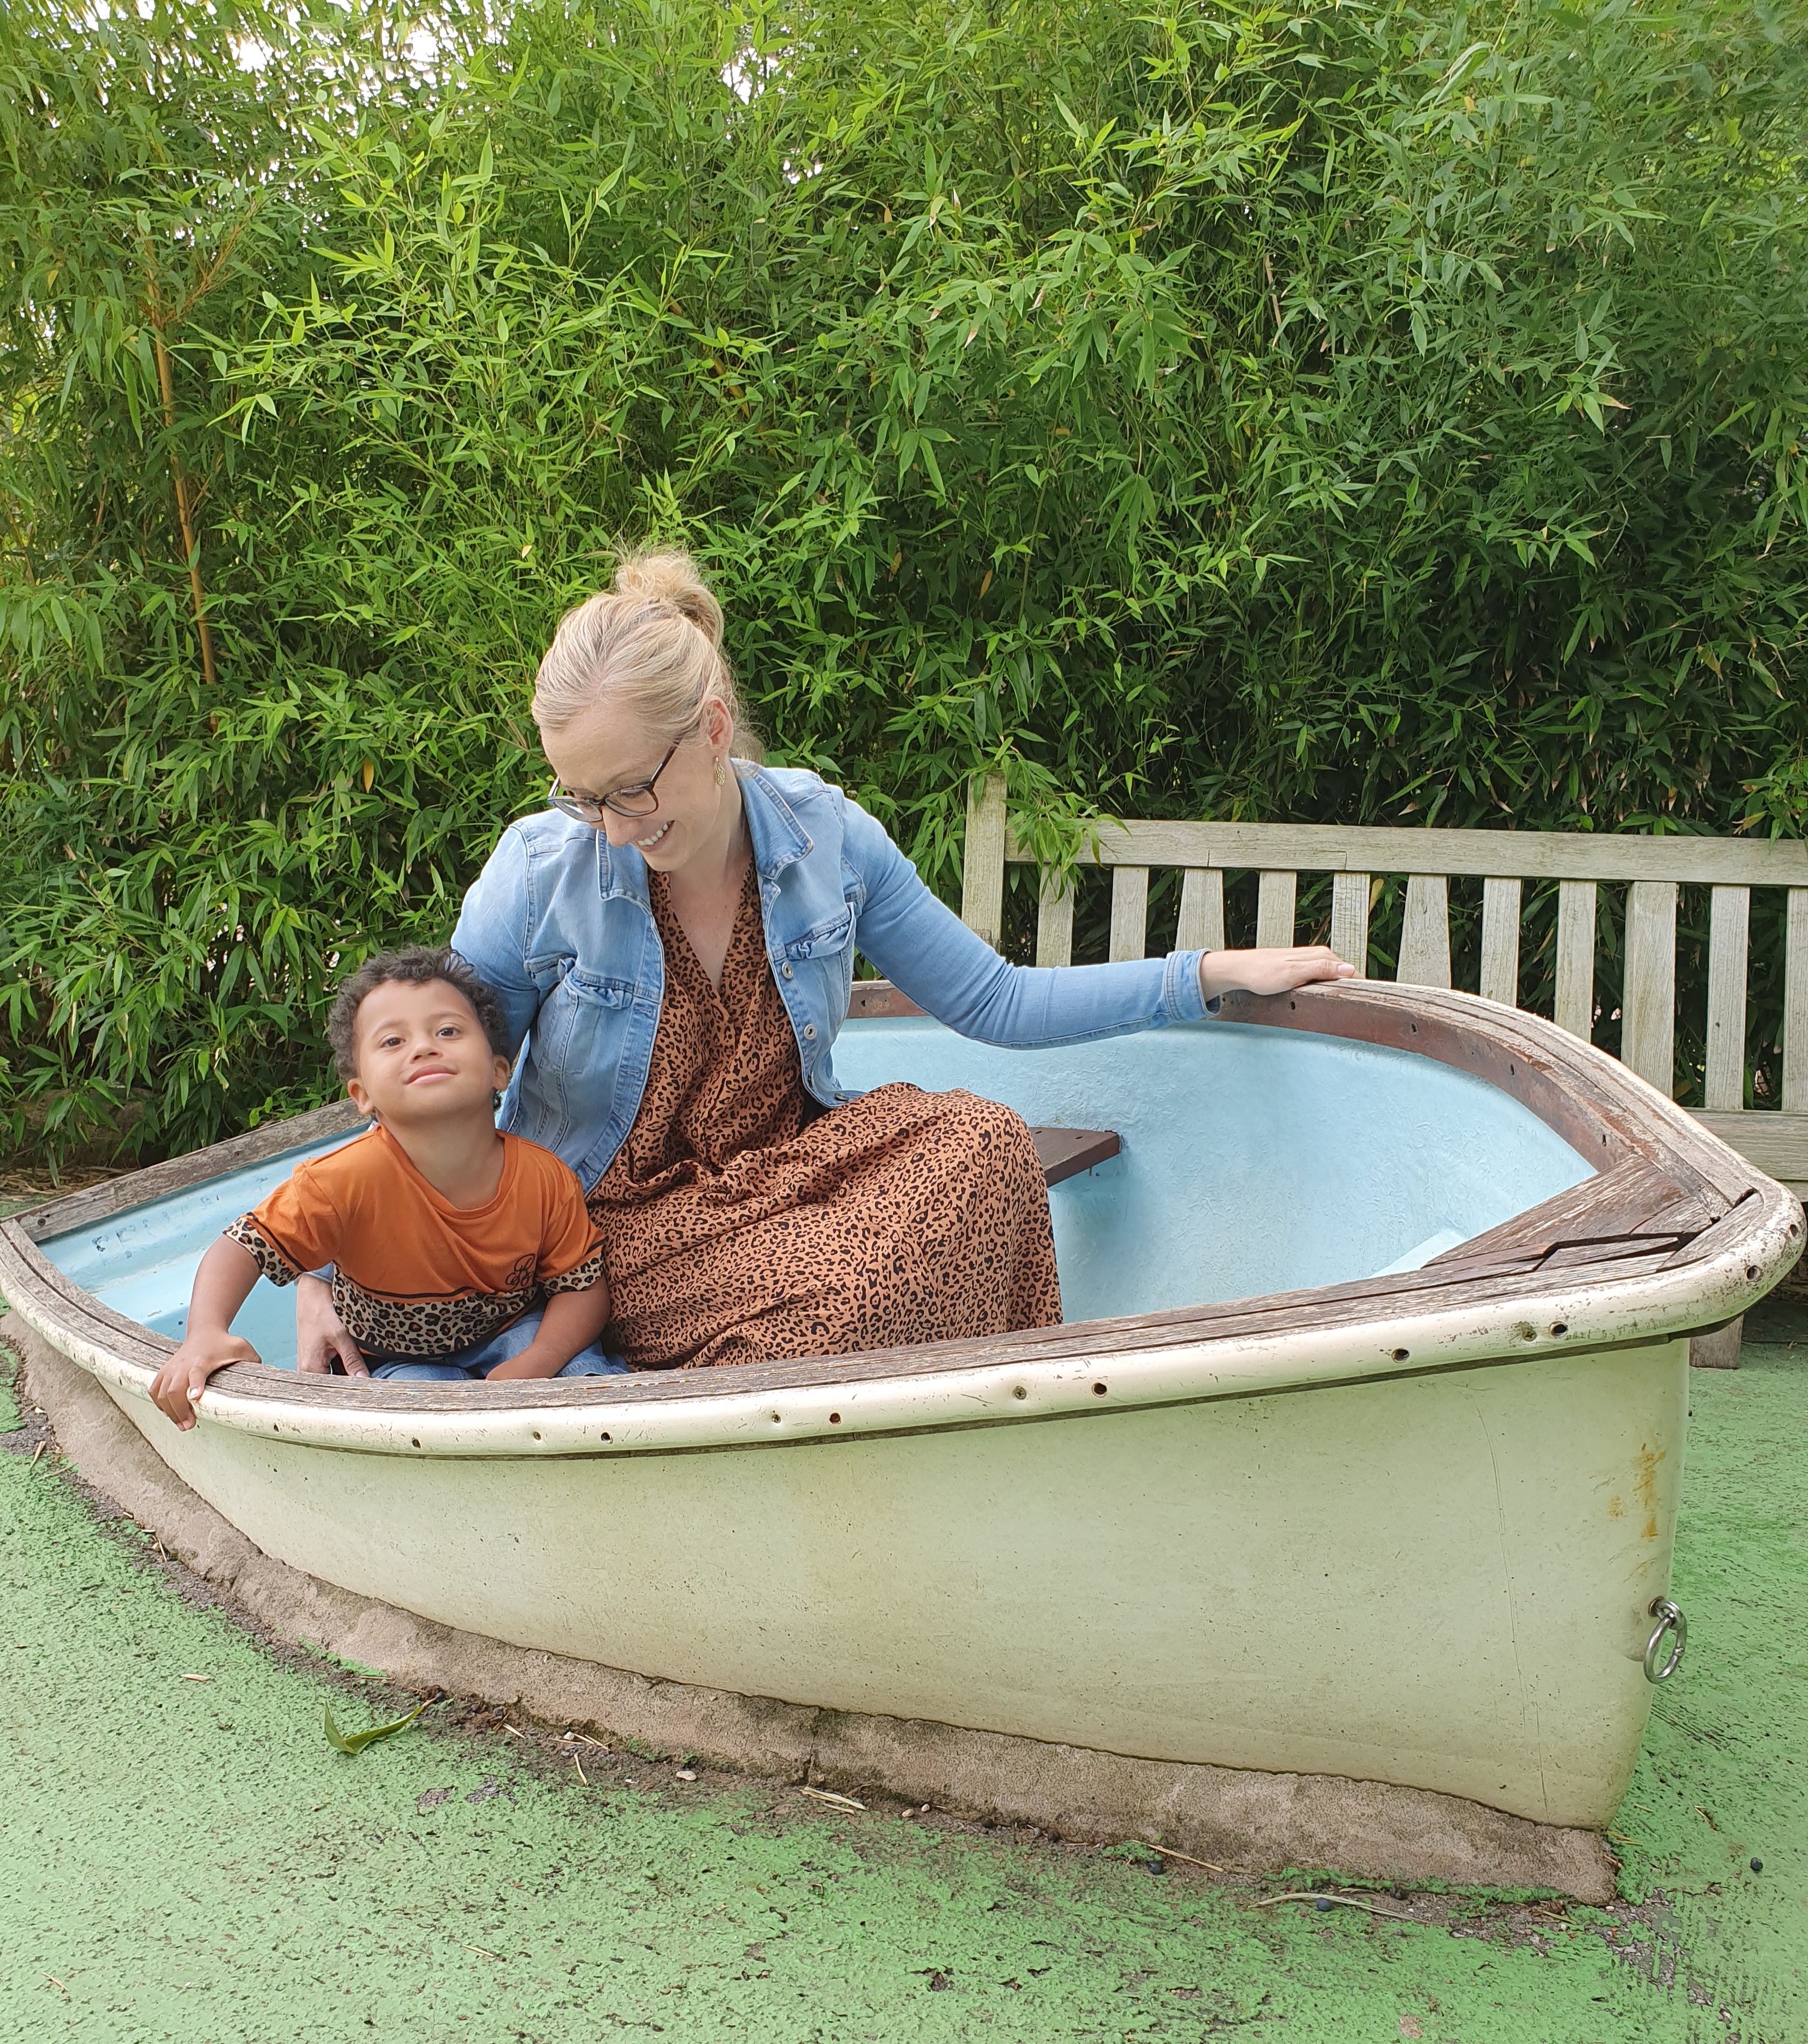 Hayley sitting in an old boat in the grass with her son.